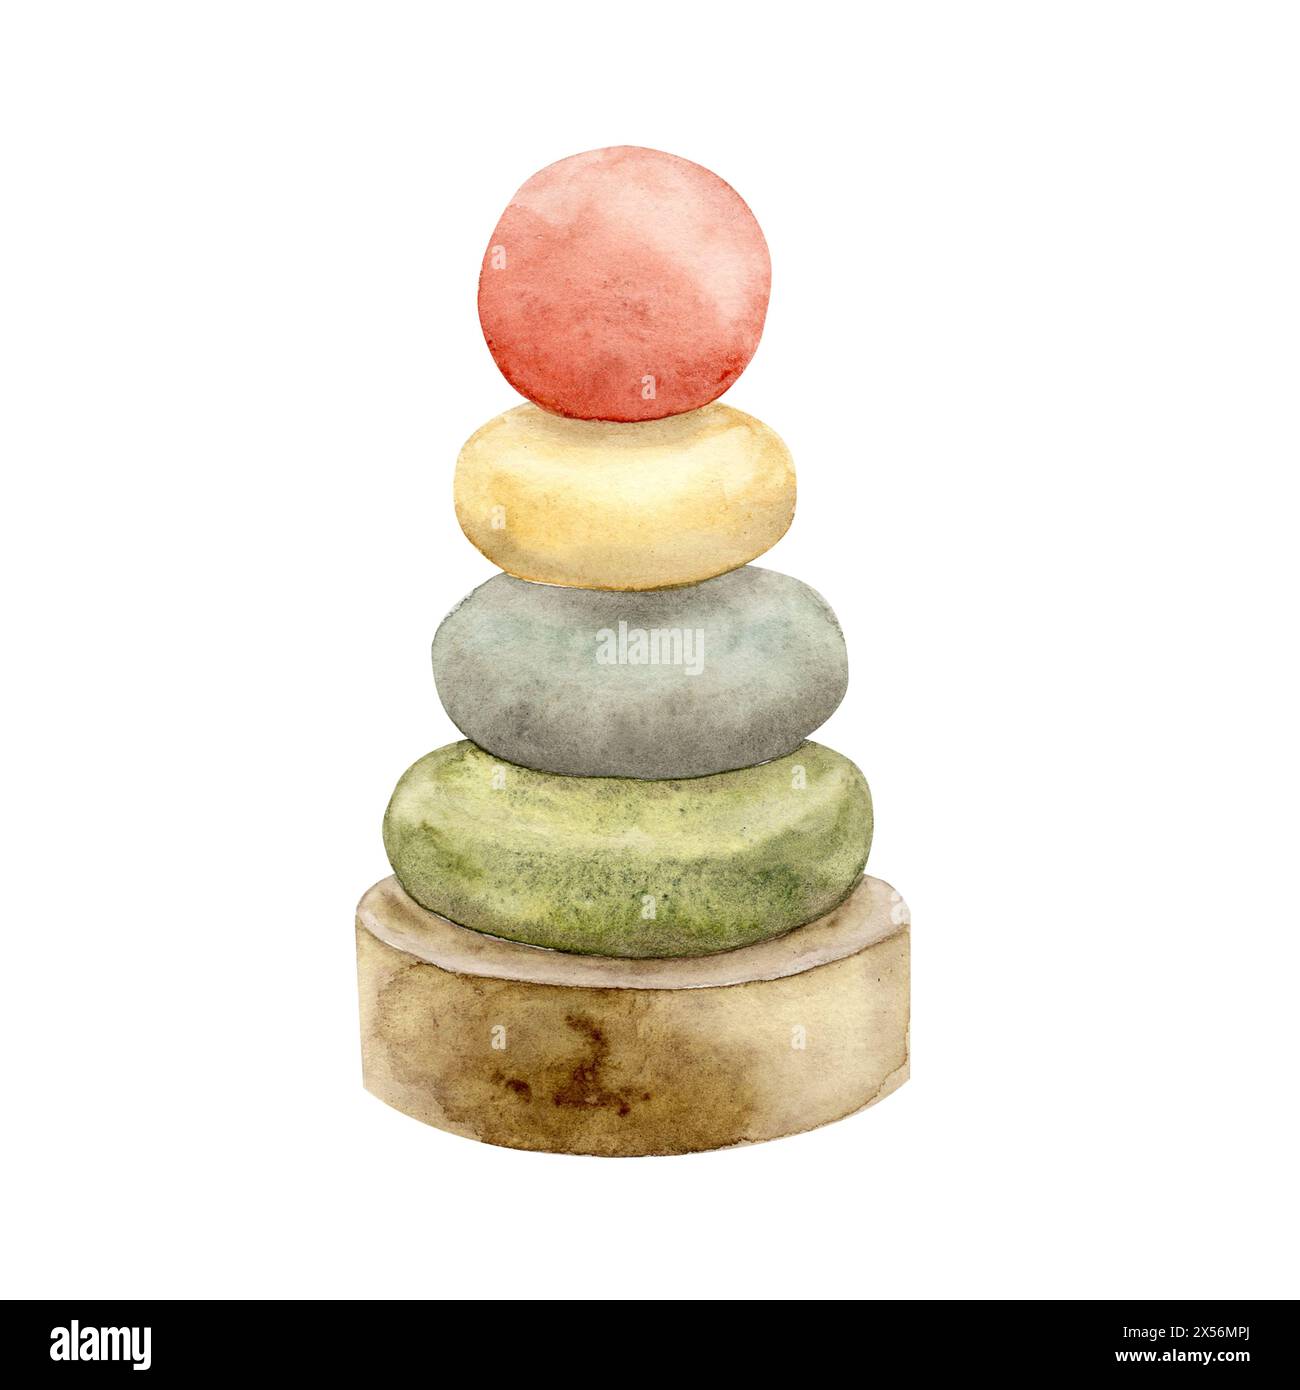 Illustration of a children's wooden toy pyramid with rings of different colors, red, yellow, green. Isolated watercolor illustration for cards, sticke Stock Photo